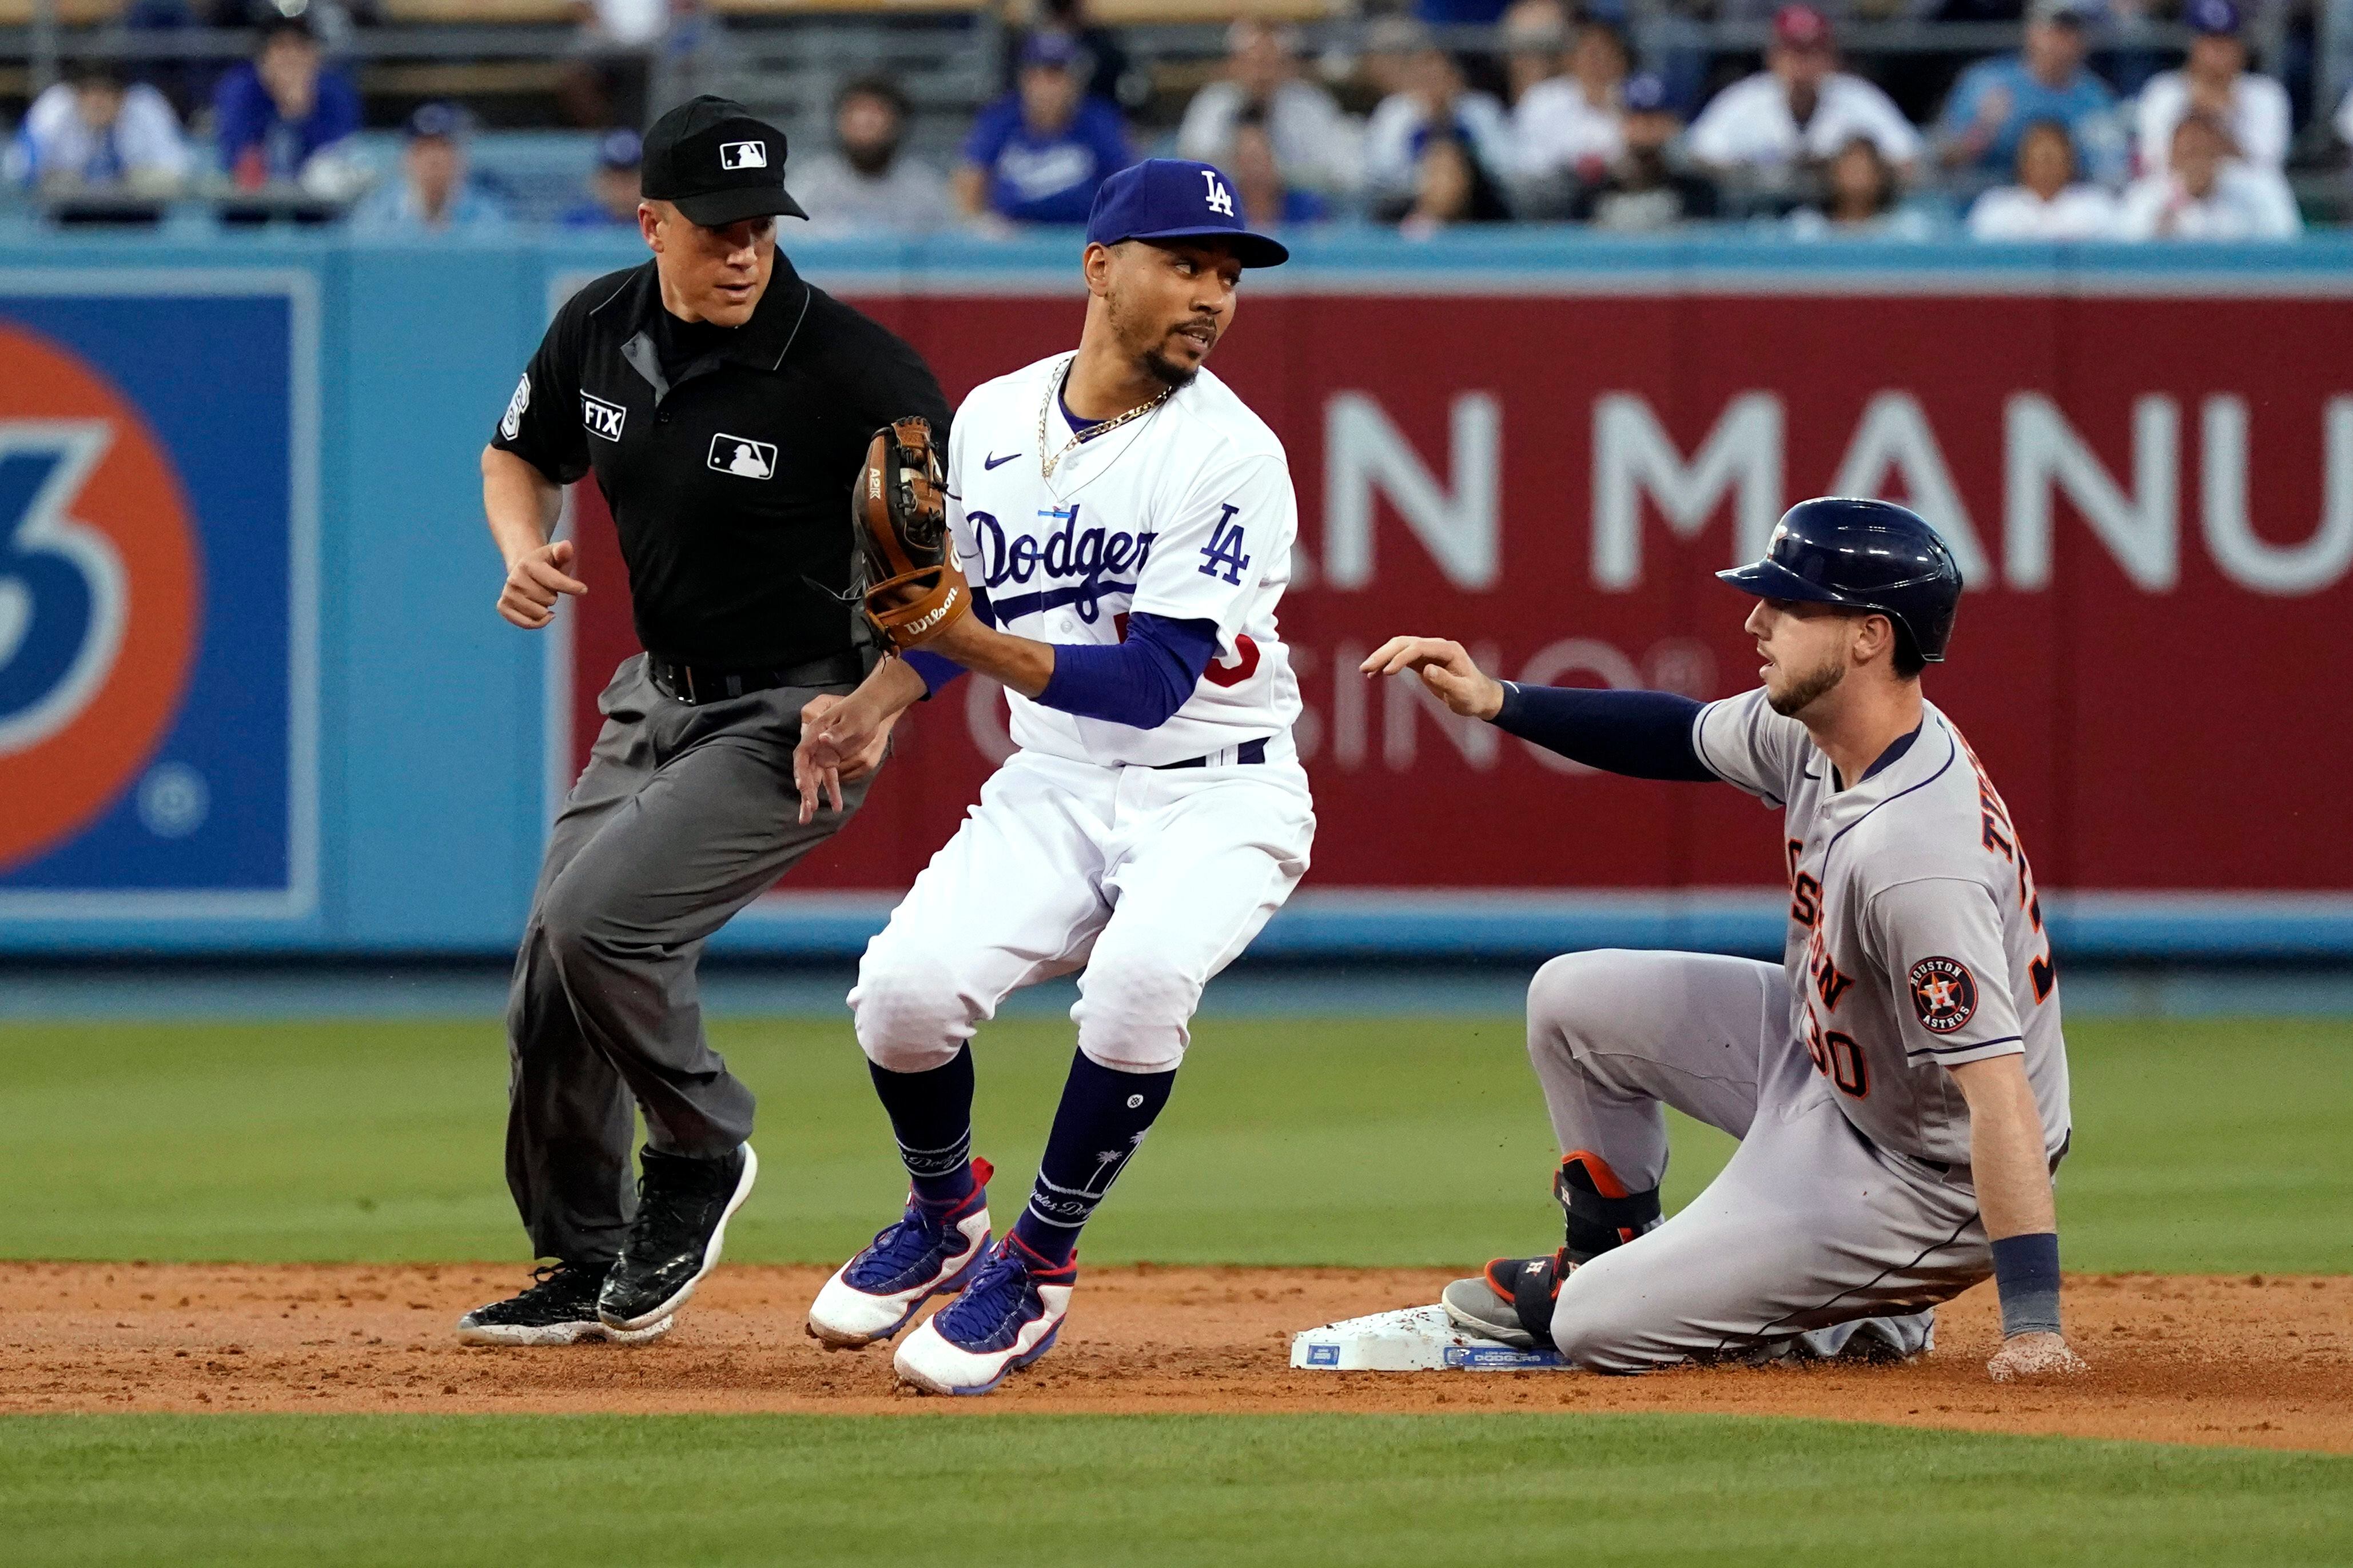 Dodgers-Astros: L.A. fans expected to be raucous for Houston's return